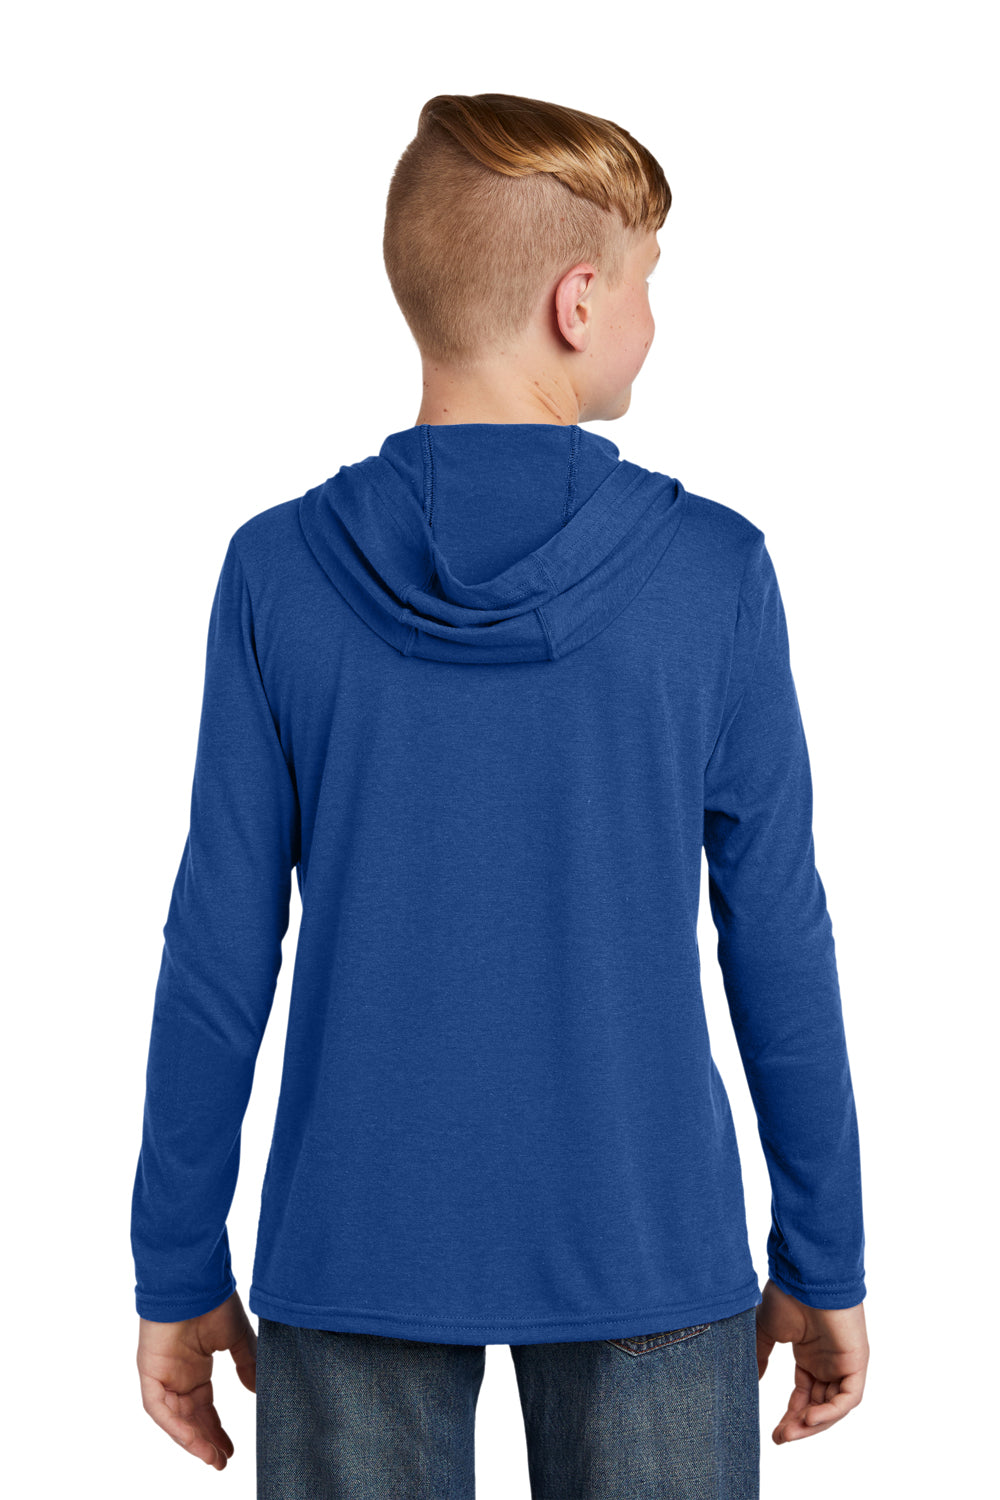 District Youth Perfect Long Sleeve Hooded T-Shirt Hoodie Deep Royal Blue Side